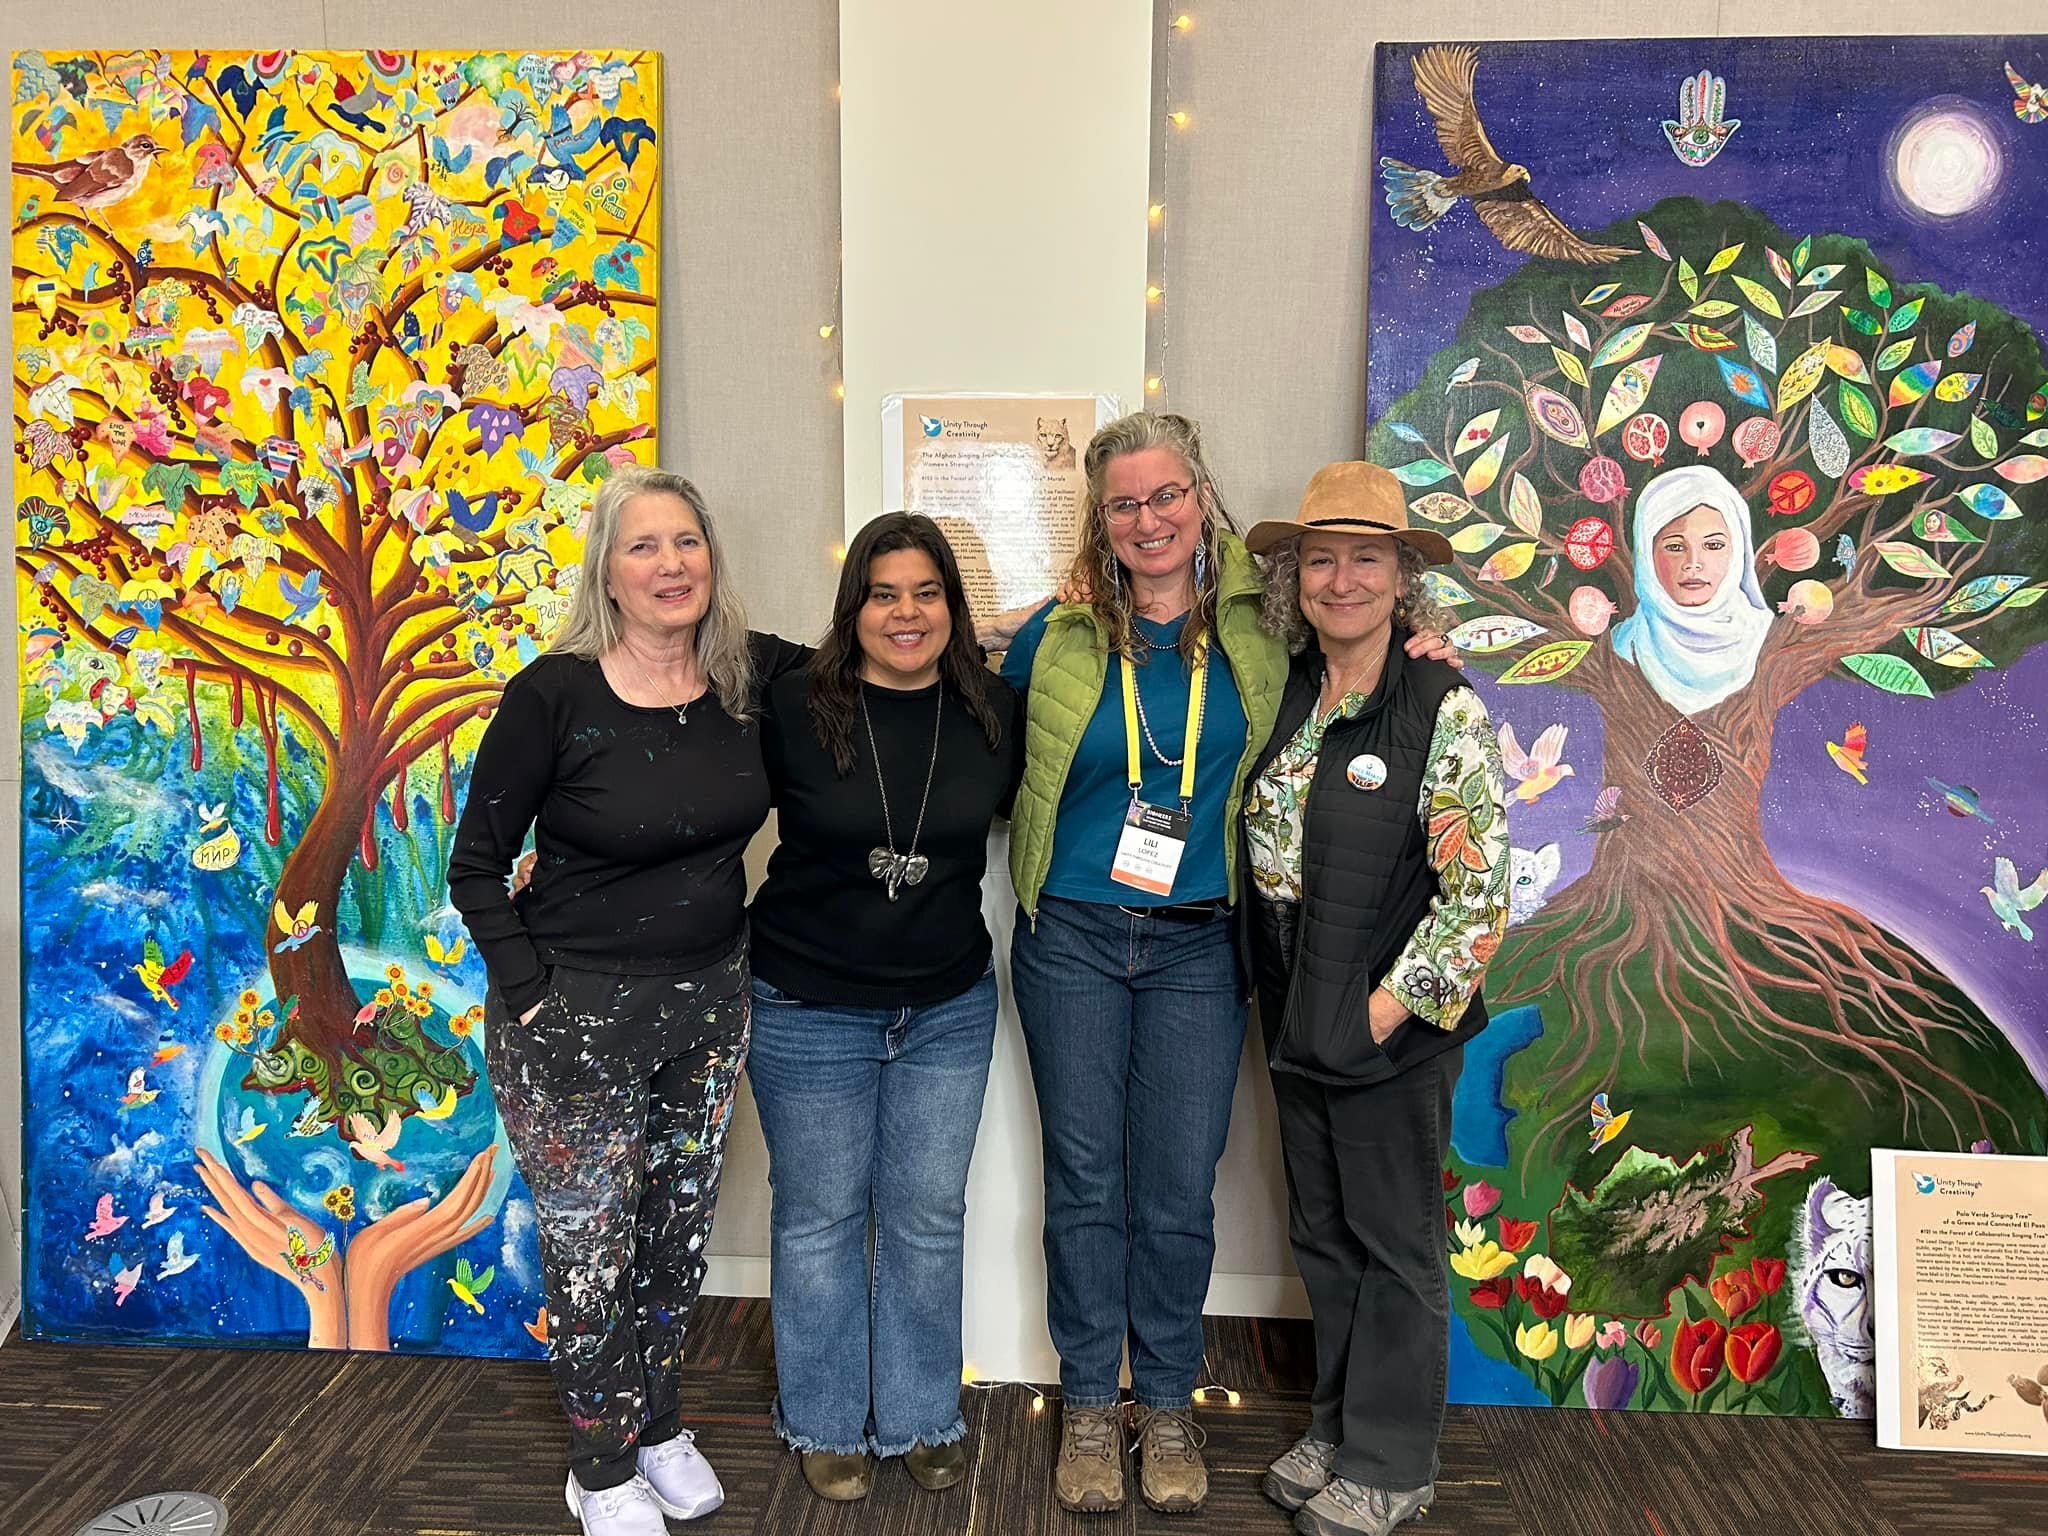 Today I attended the Bioneers conference to support my mentor on her 14th Singjng Tree mural with the youth.

I decided to attend a sharing and listening circle led by restorative justice facilitators to discuss the events of Gaza/Israel. 

Earlier i